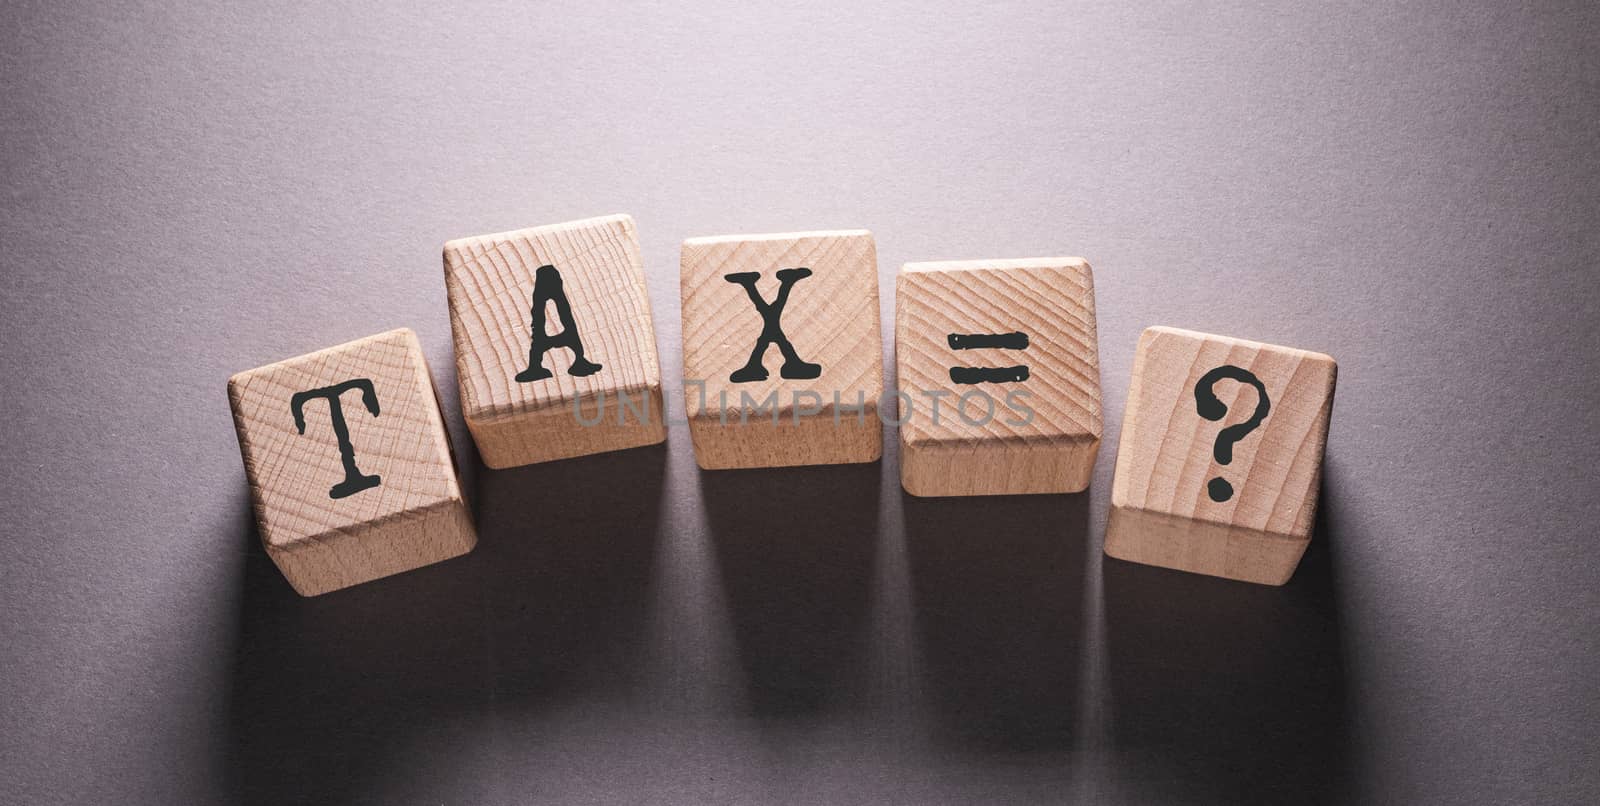 Tax Word with Wooden Cubes by Jievani